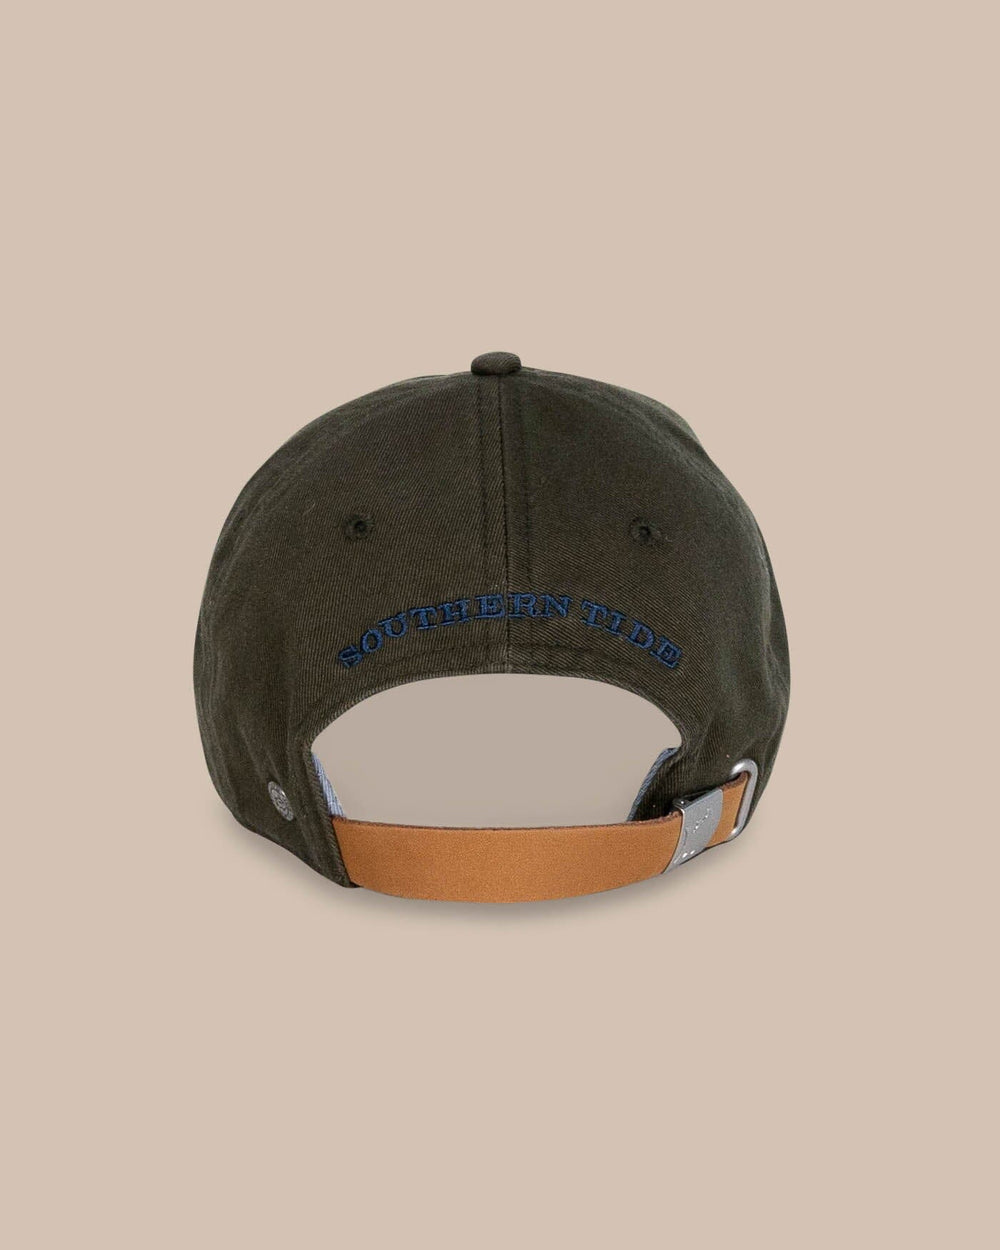 The back view of the Southern Tide mini-skipjack-leather-strap-hat-3 by Southern Tide - Forest